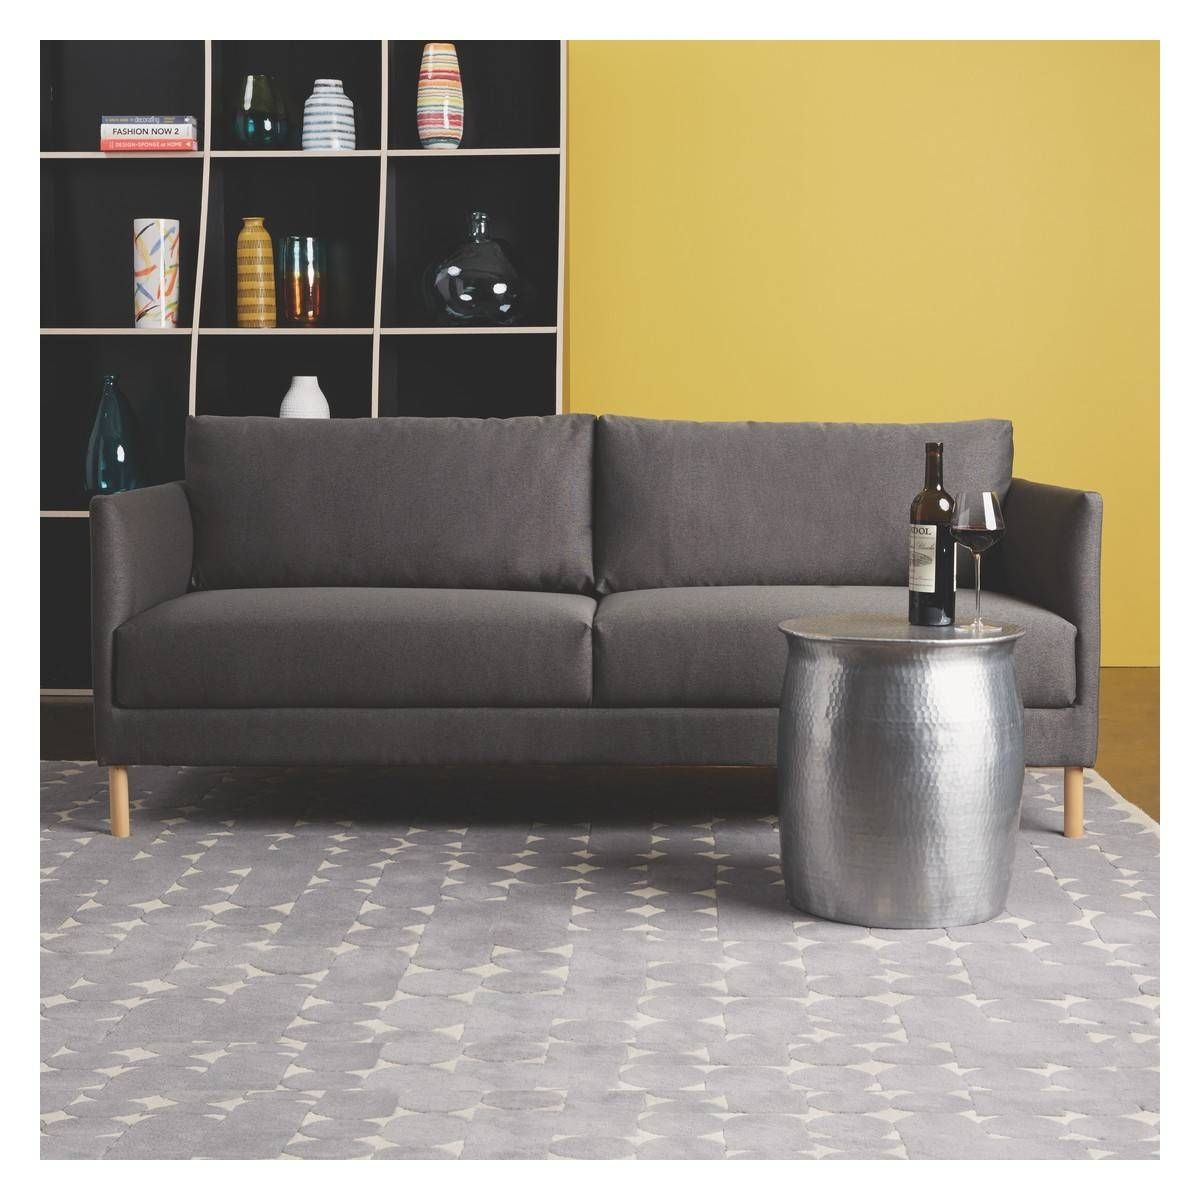 Hyde Yellow Fabric 3 Seater Sofa, Wooden Legs | Buy Now At Habitat Uk For Wood Legs Sofas (View 23 of 30)